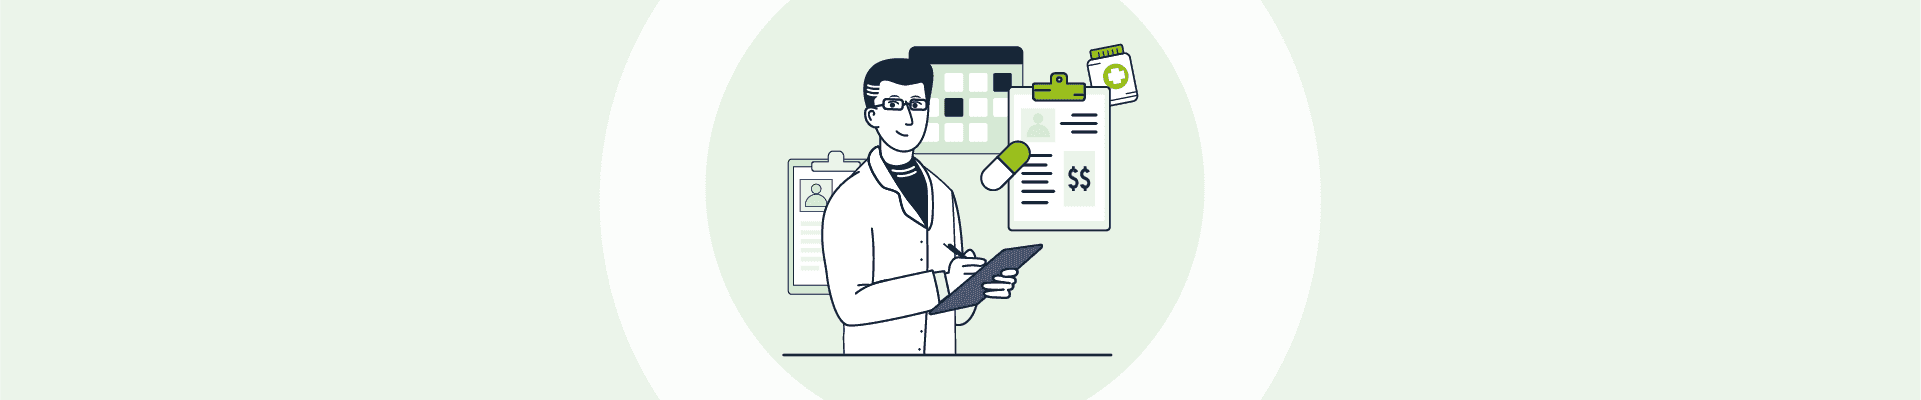 How to Pick A Medical Billing Company That Perfectly Fits Your Practice?